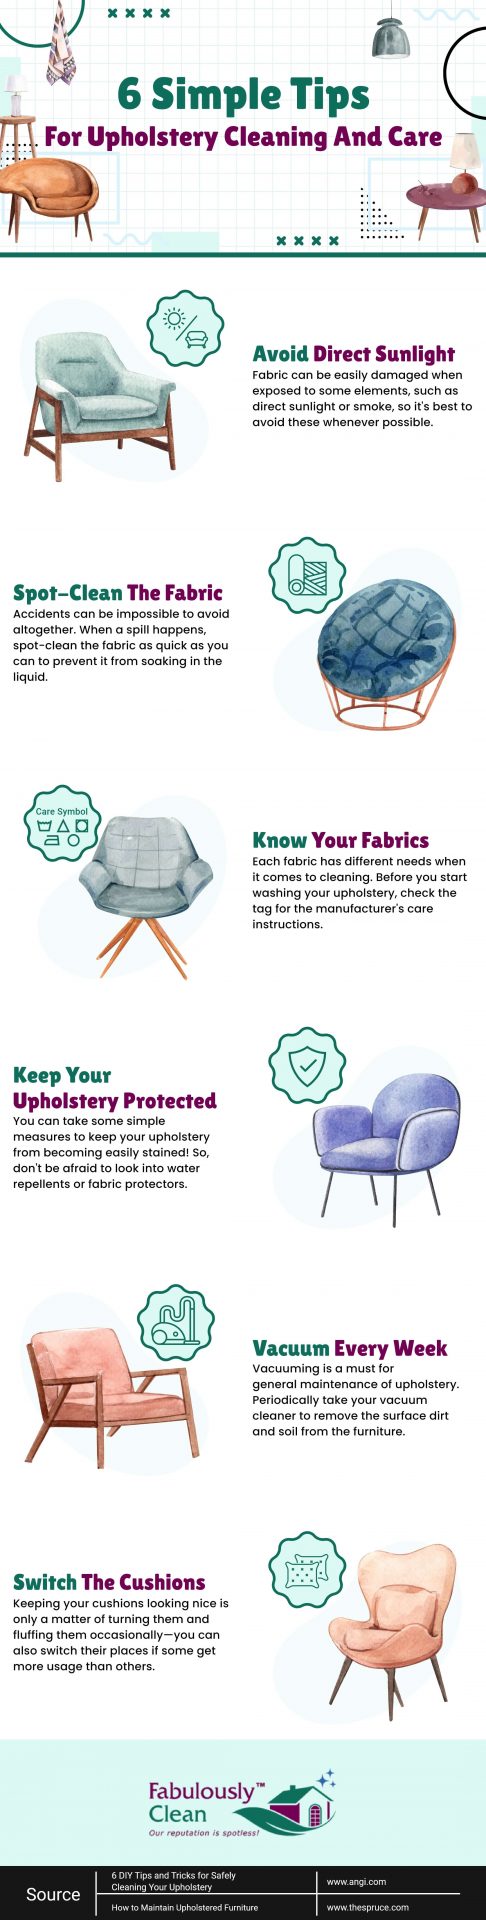 Cleaning Antique Upholstery Tips: Pro Cleaners Advice